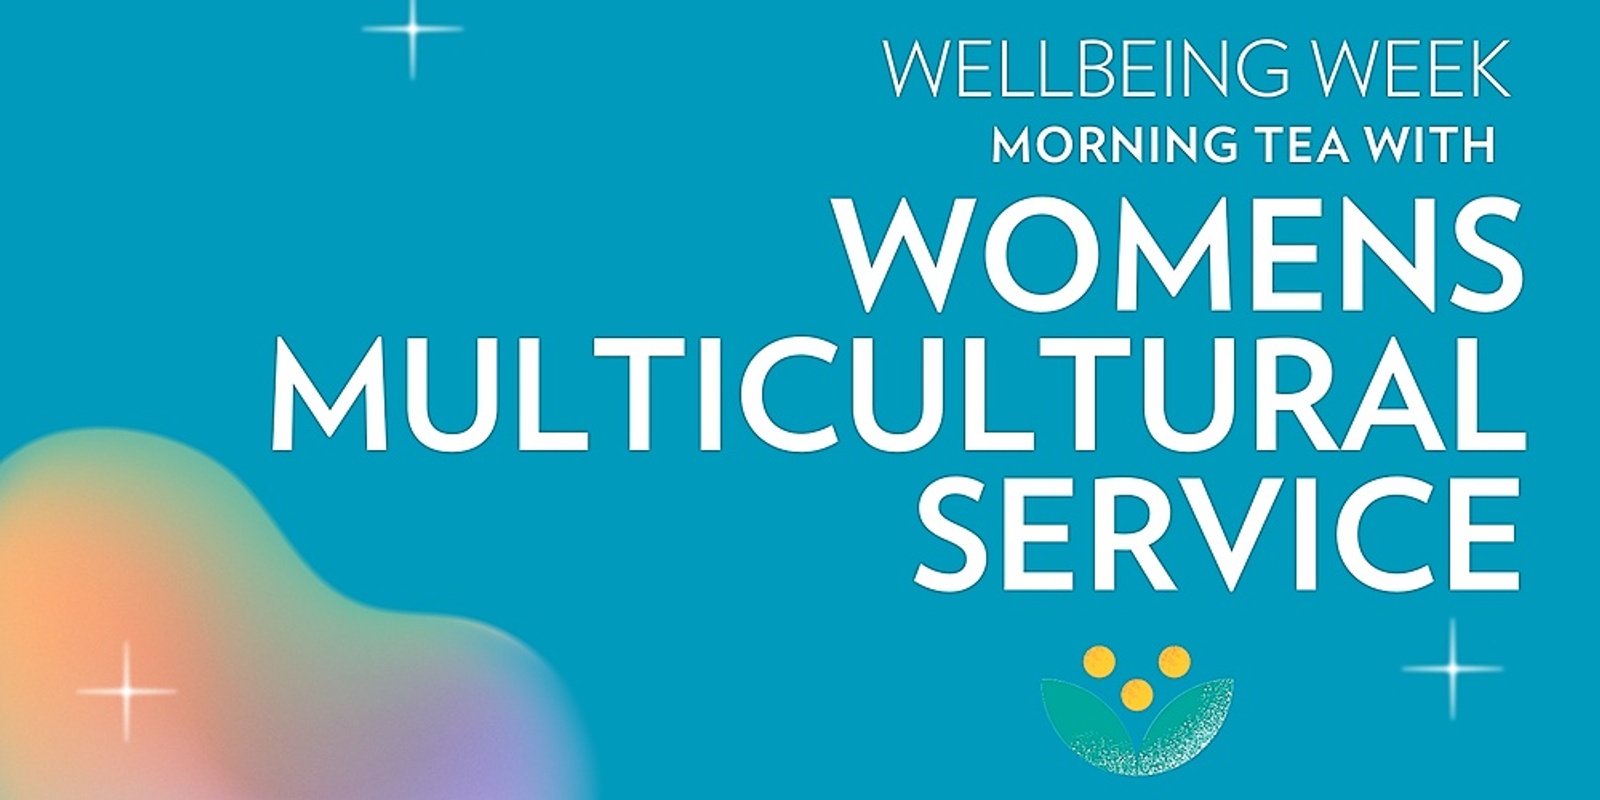 Morning Tea with Women's Multicultural Service